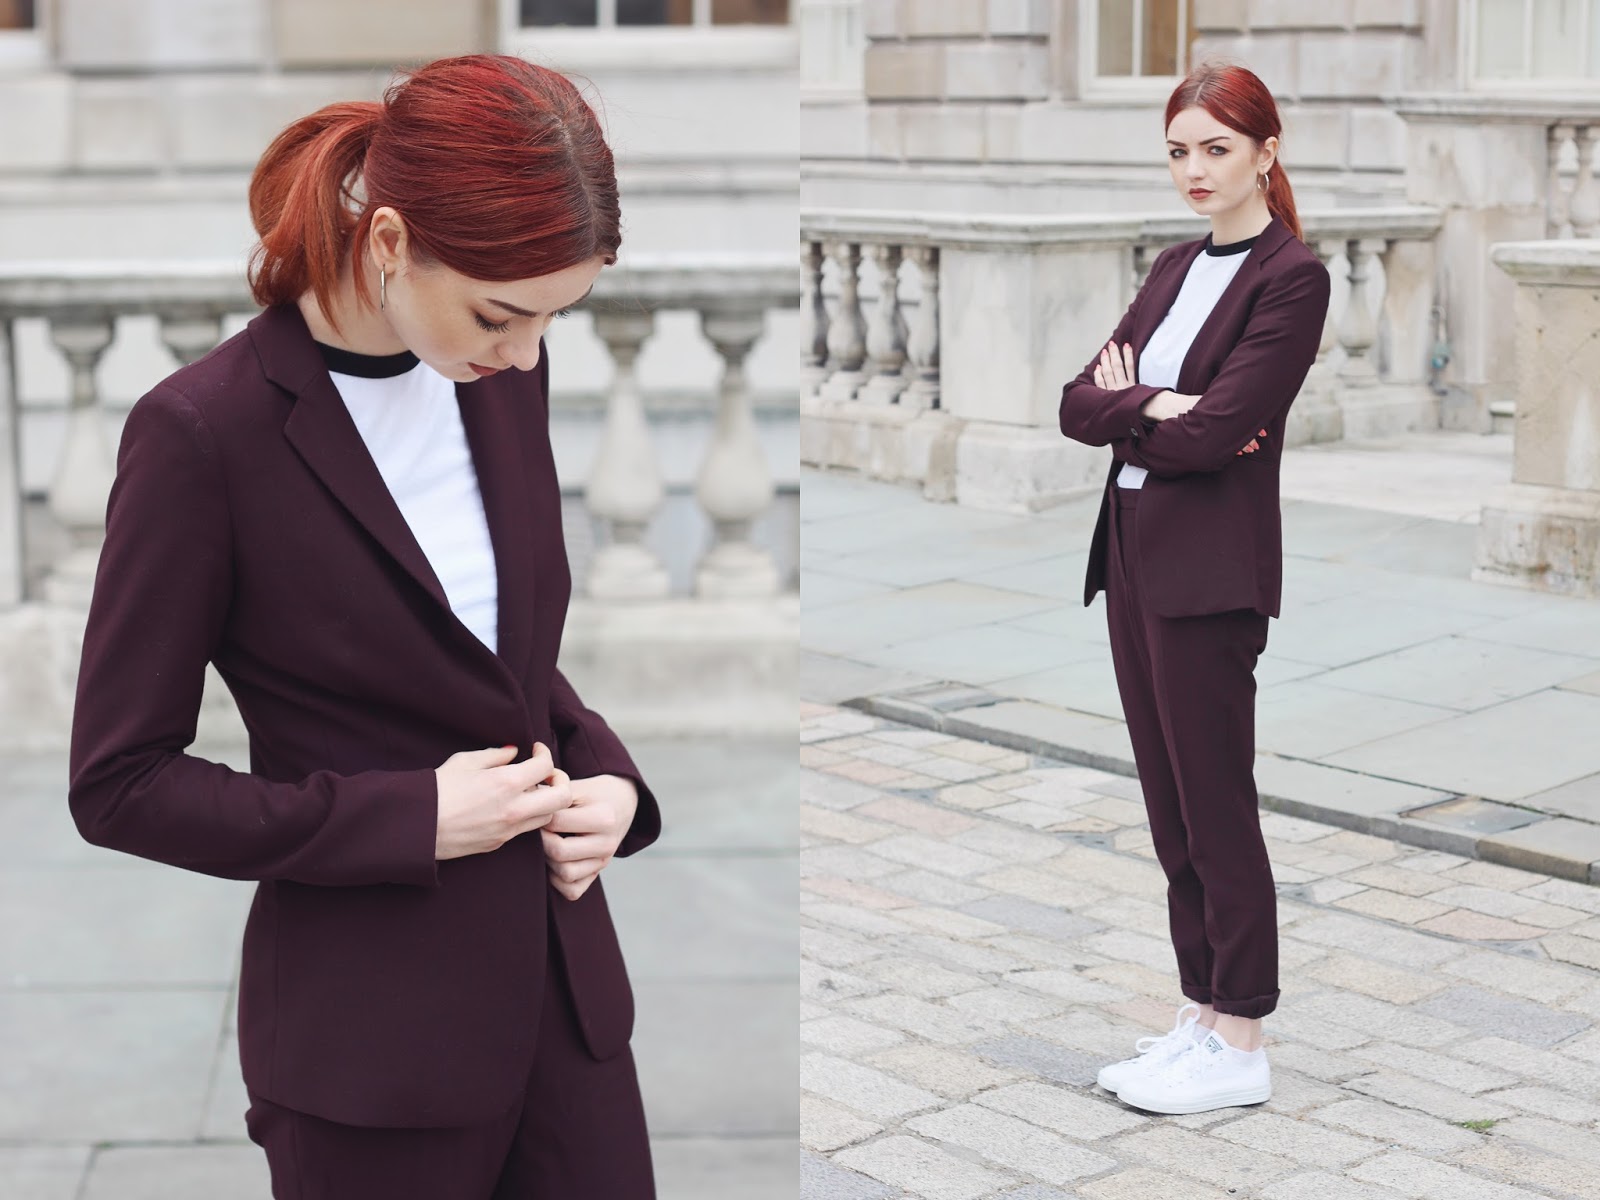 Restyling the Berry Suit